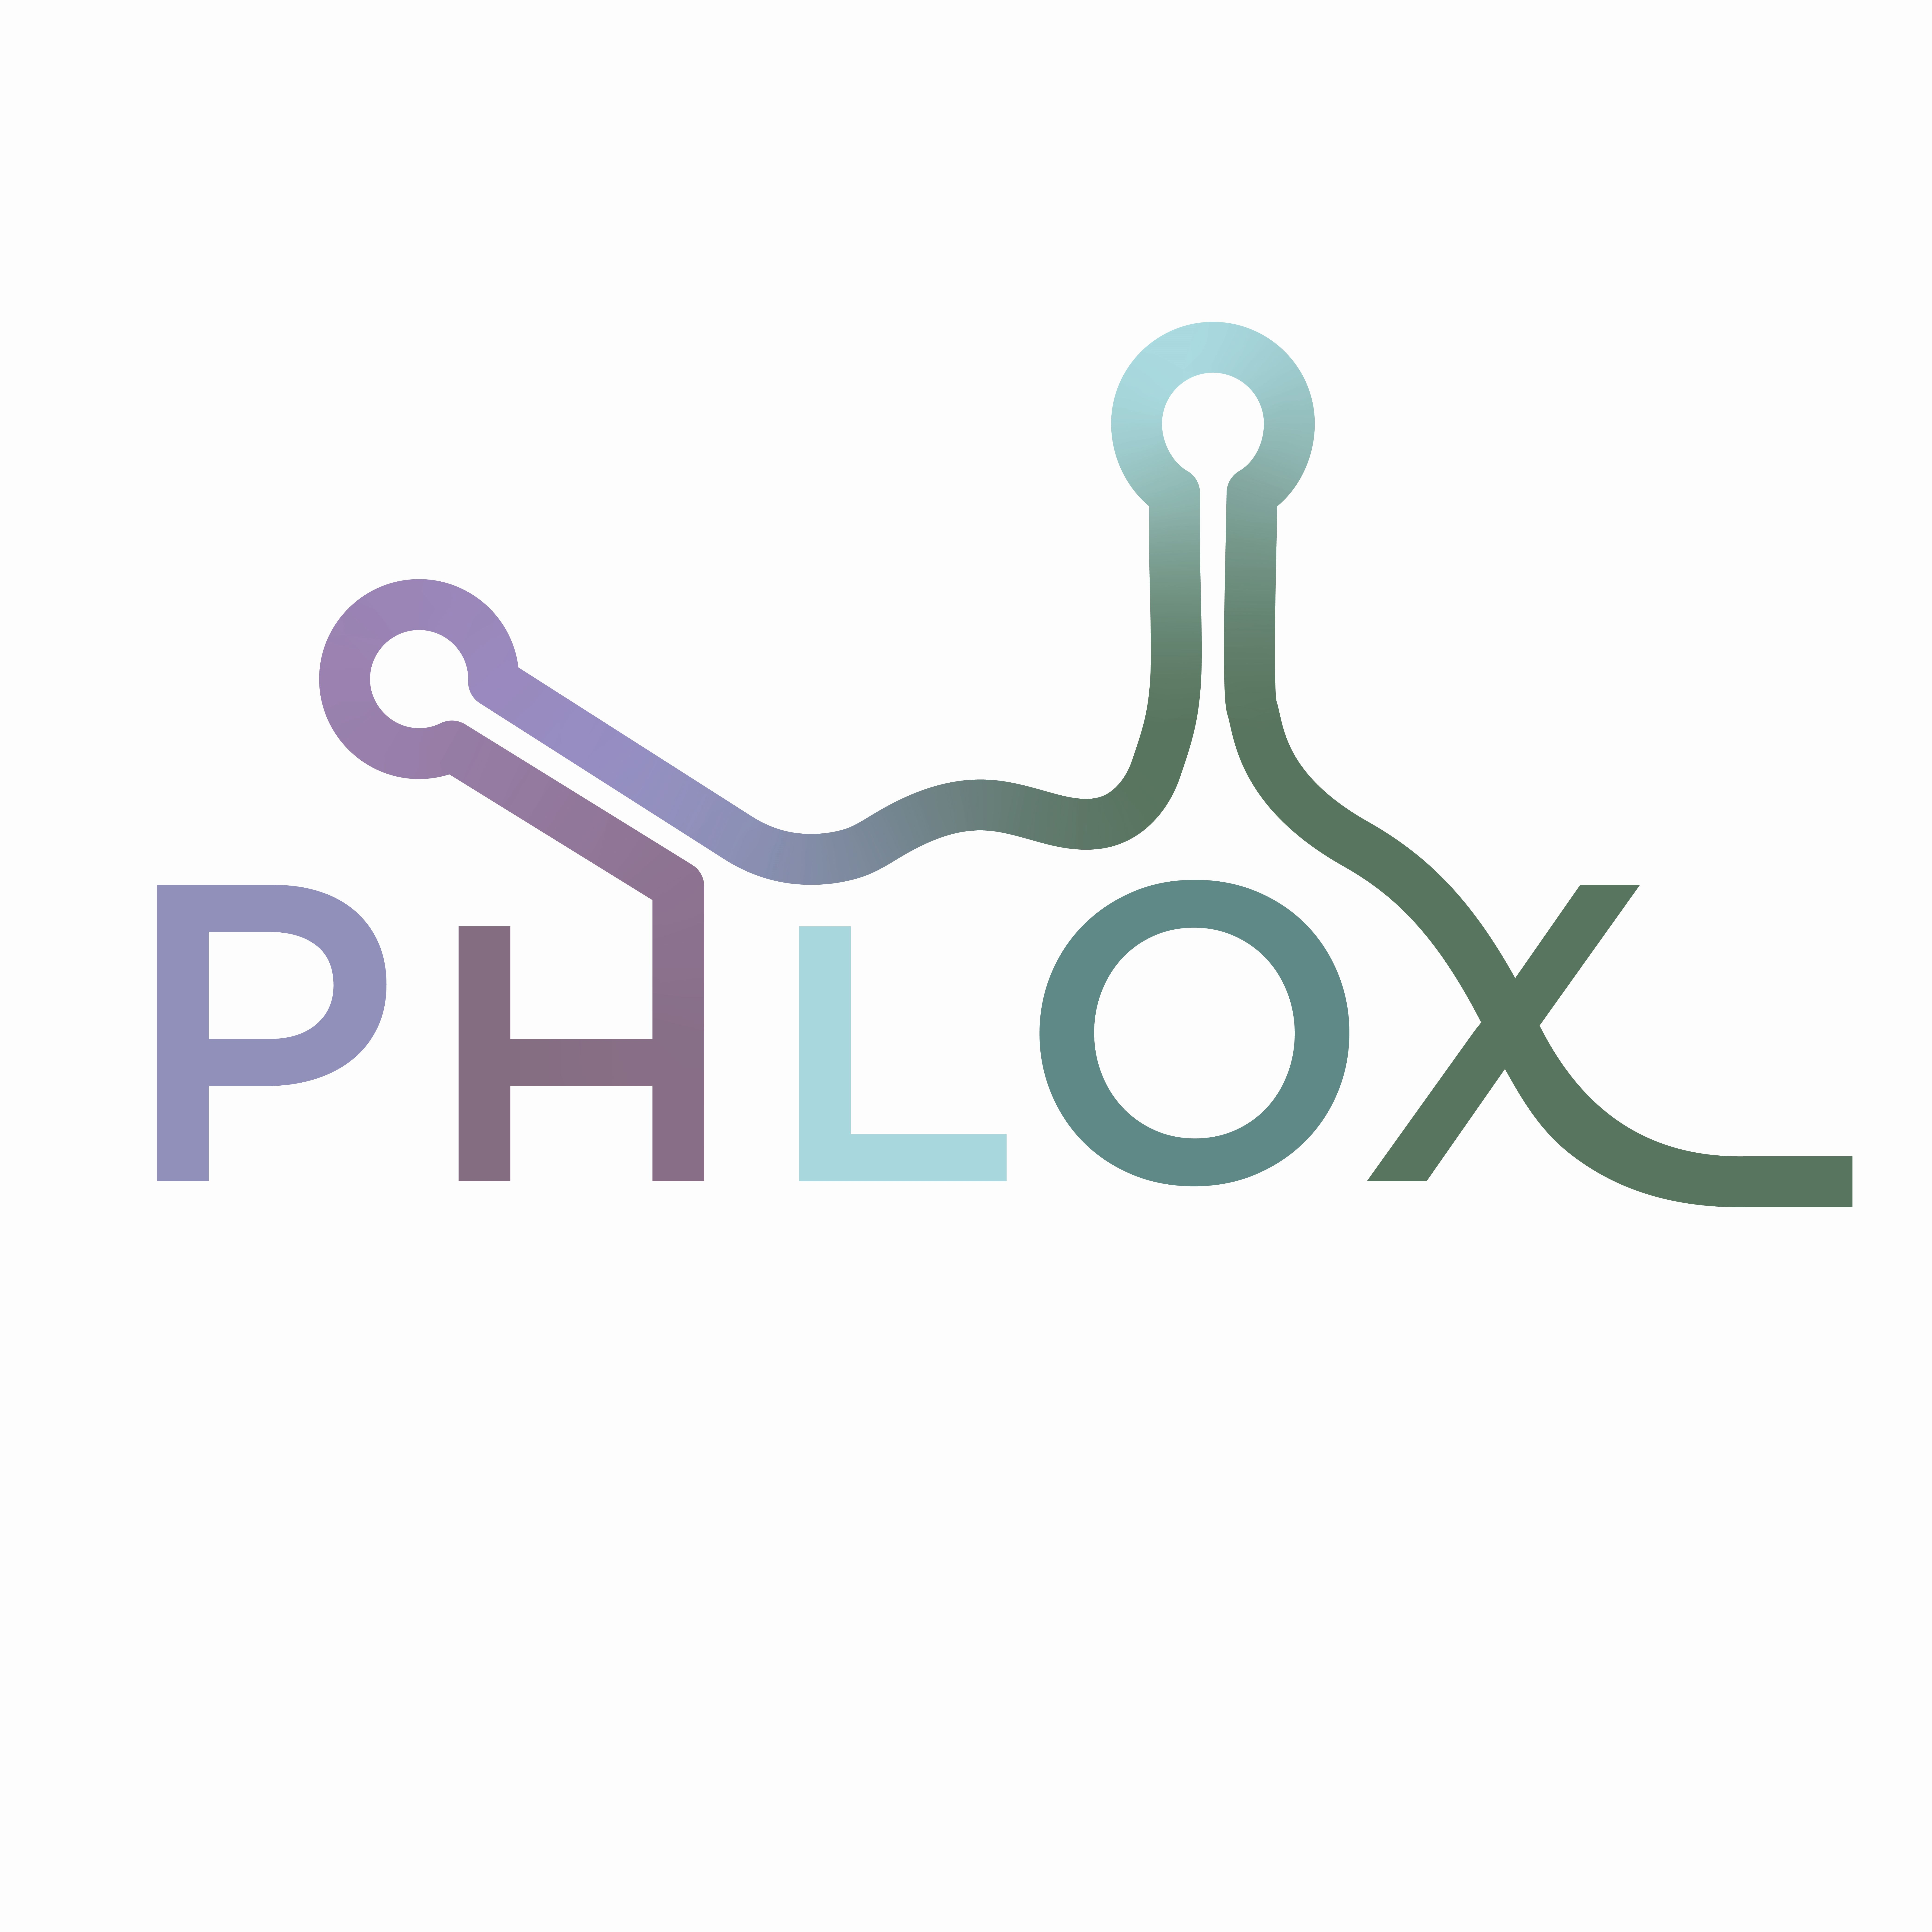 Phlox Therapeutics raises additional seed funding to further develop RNA therapies for genetic laminopathies